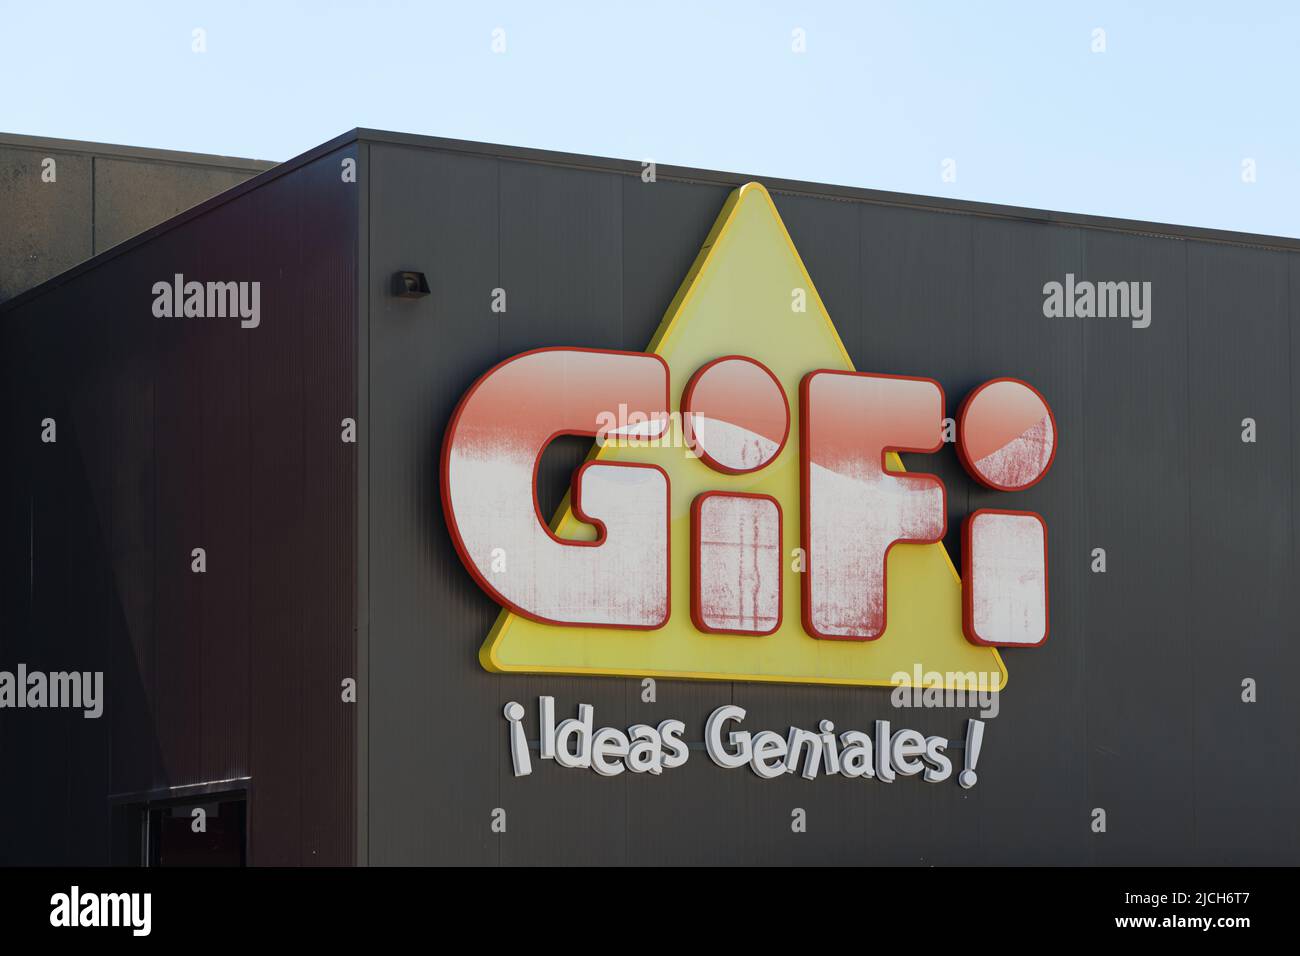 ALFAFAR, SPAIN - JUNE 06, 2022: GiFi is a French discount chain Stock Photo